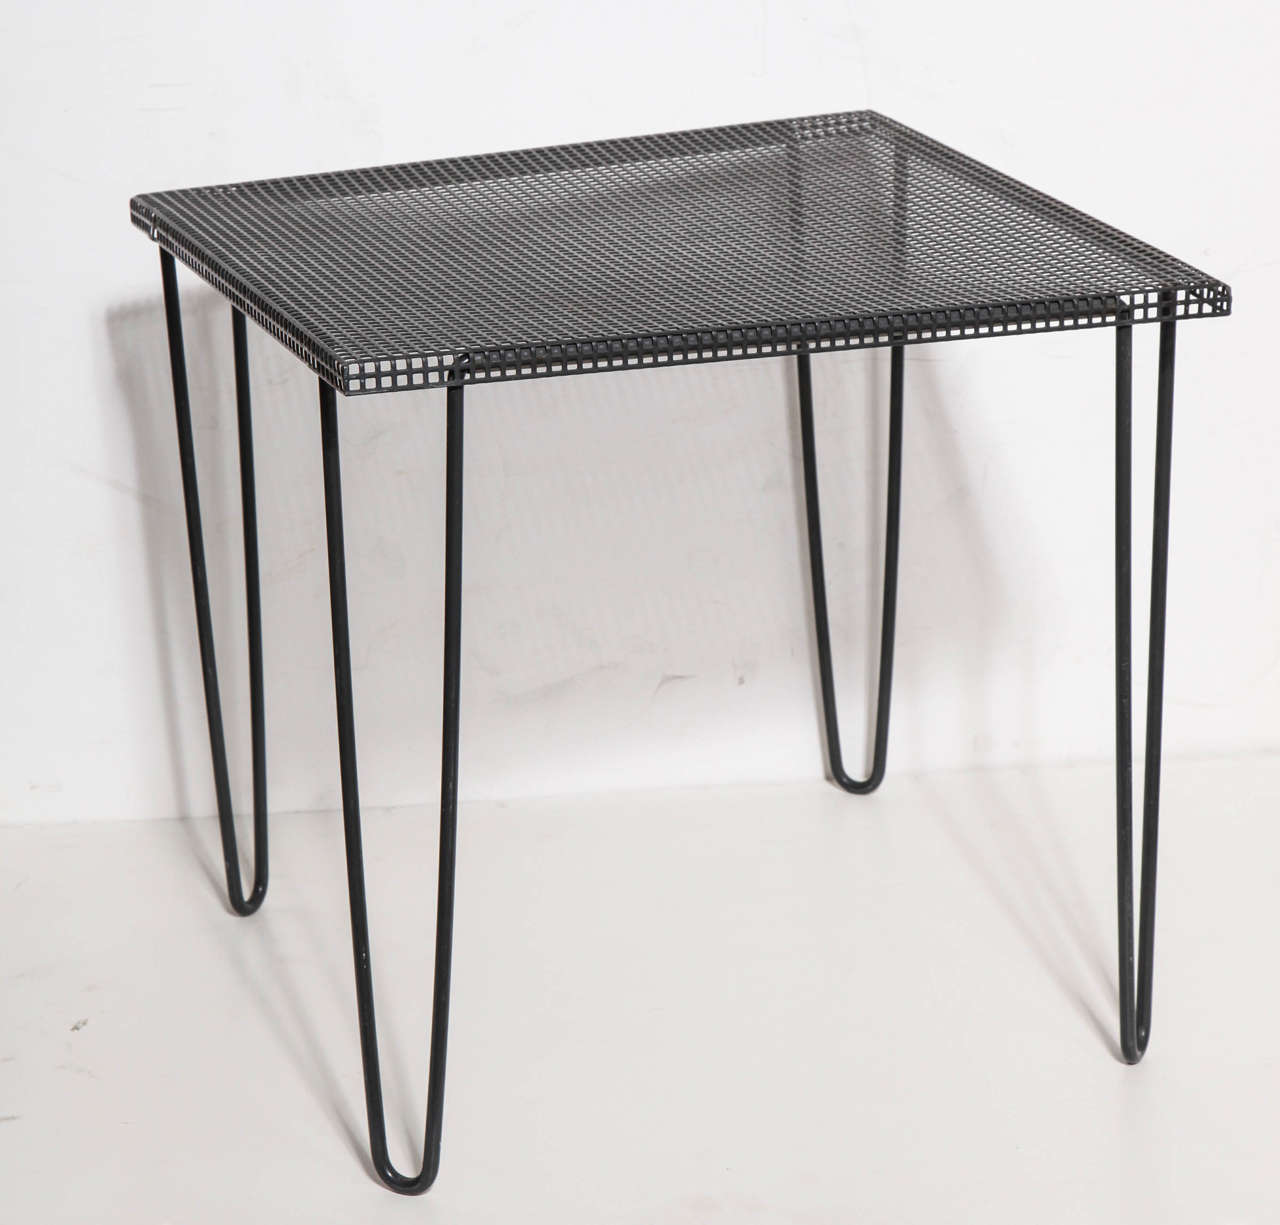 Pair of 1950s Mathieu Matégot style Black enameled Iron and Metal Mesh Tables.  Featuring perforated, square Black Mesh Tops and Black enameled Iron hair pin legs. Versatile. Lightweight. Portable. Sturdy. Atomic, Great Tables for small space. Legs